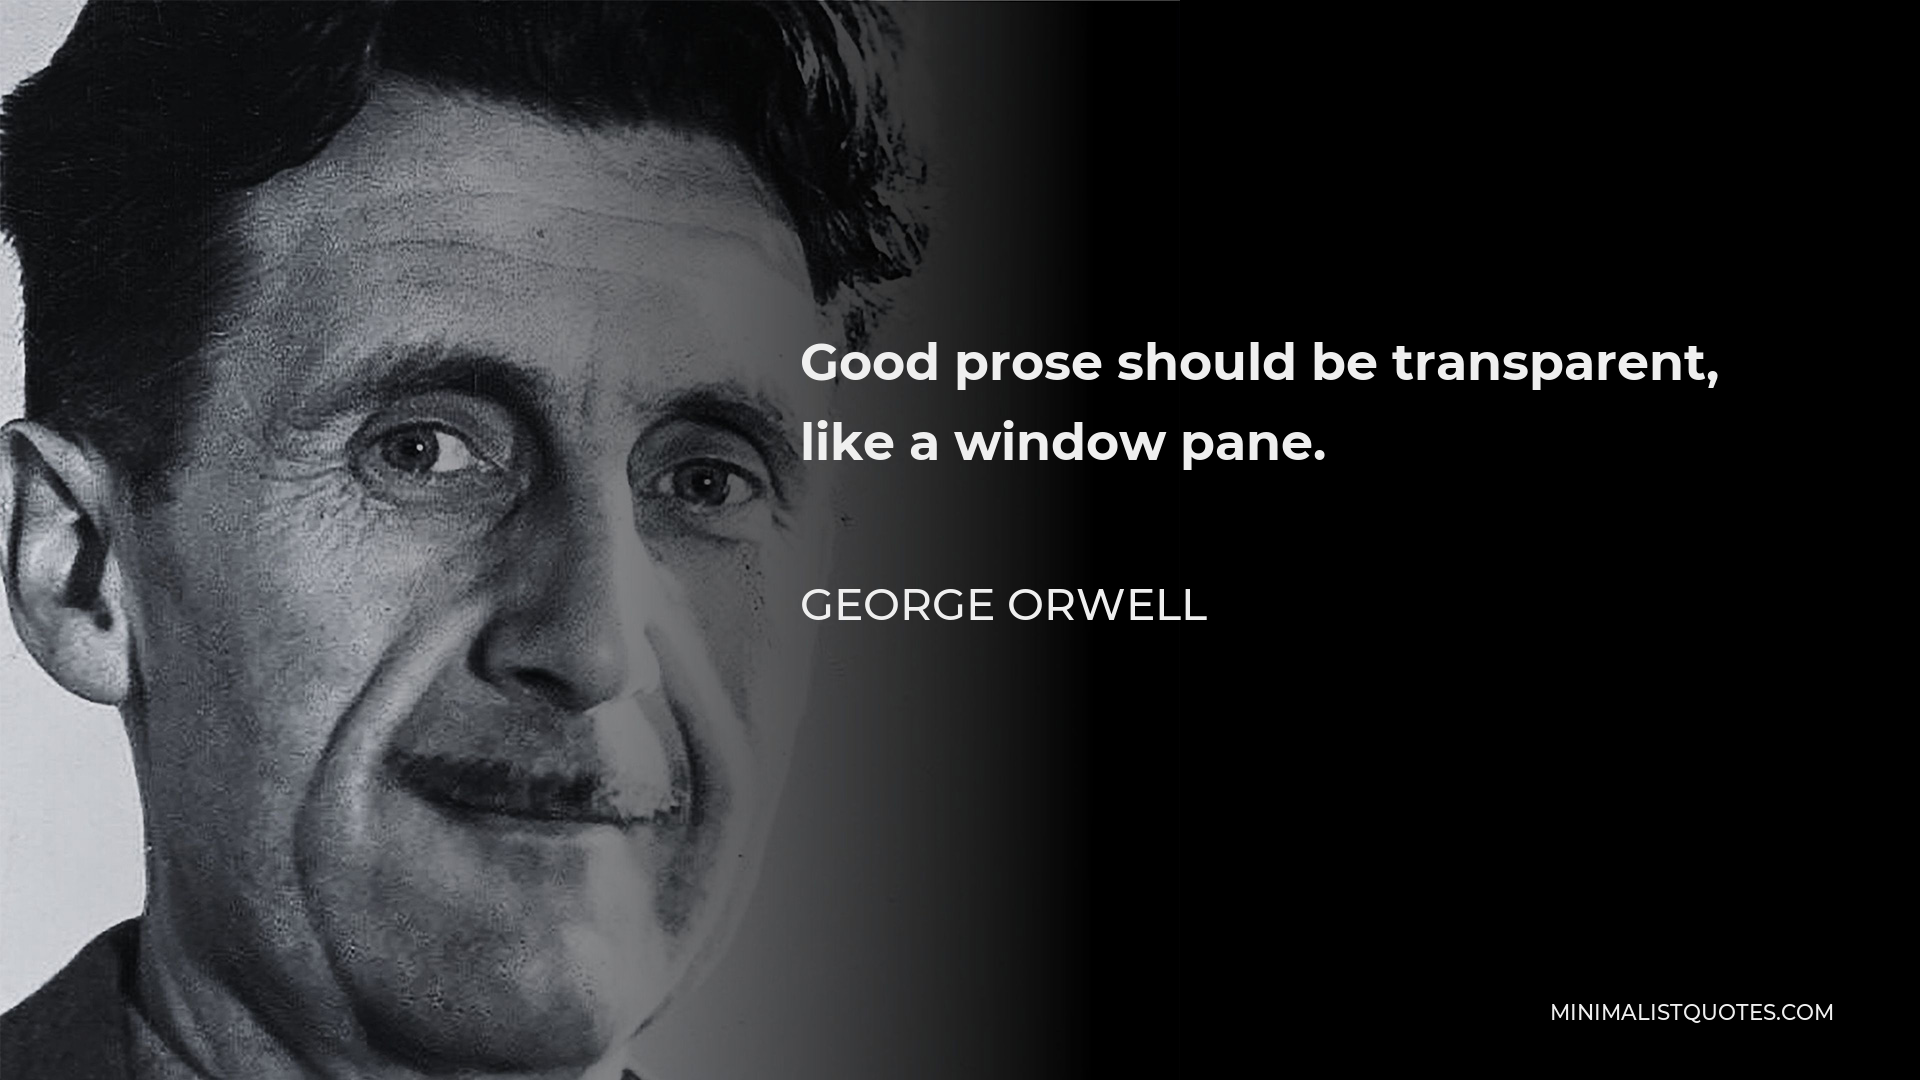 George Orwell Quote - Good prose should be transparent, like a window pane.